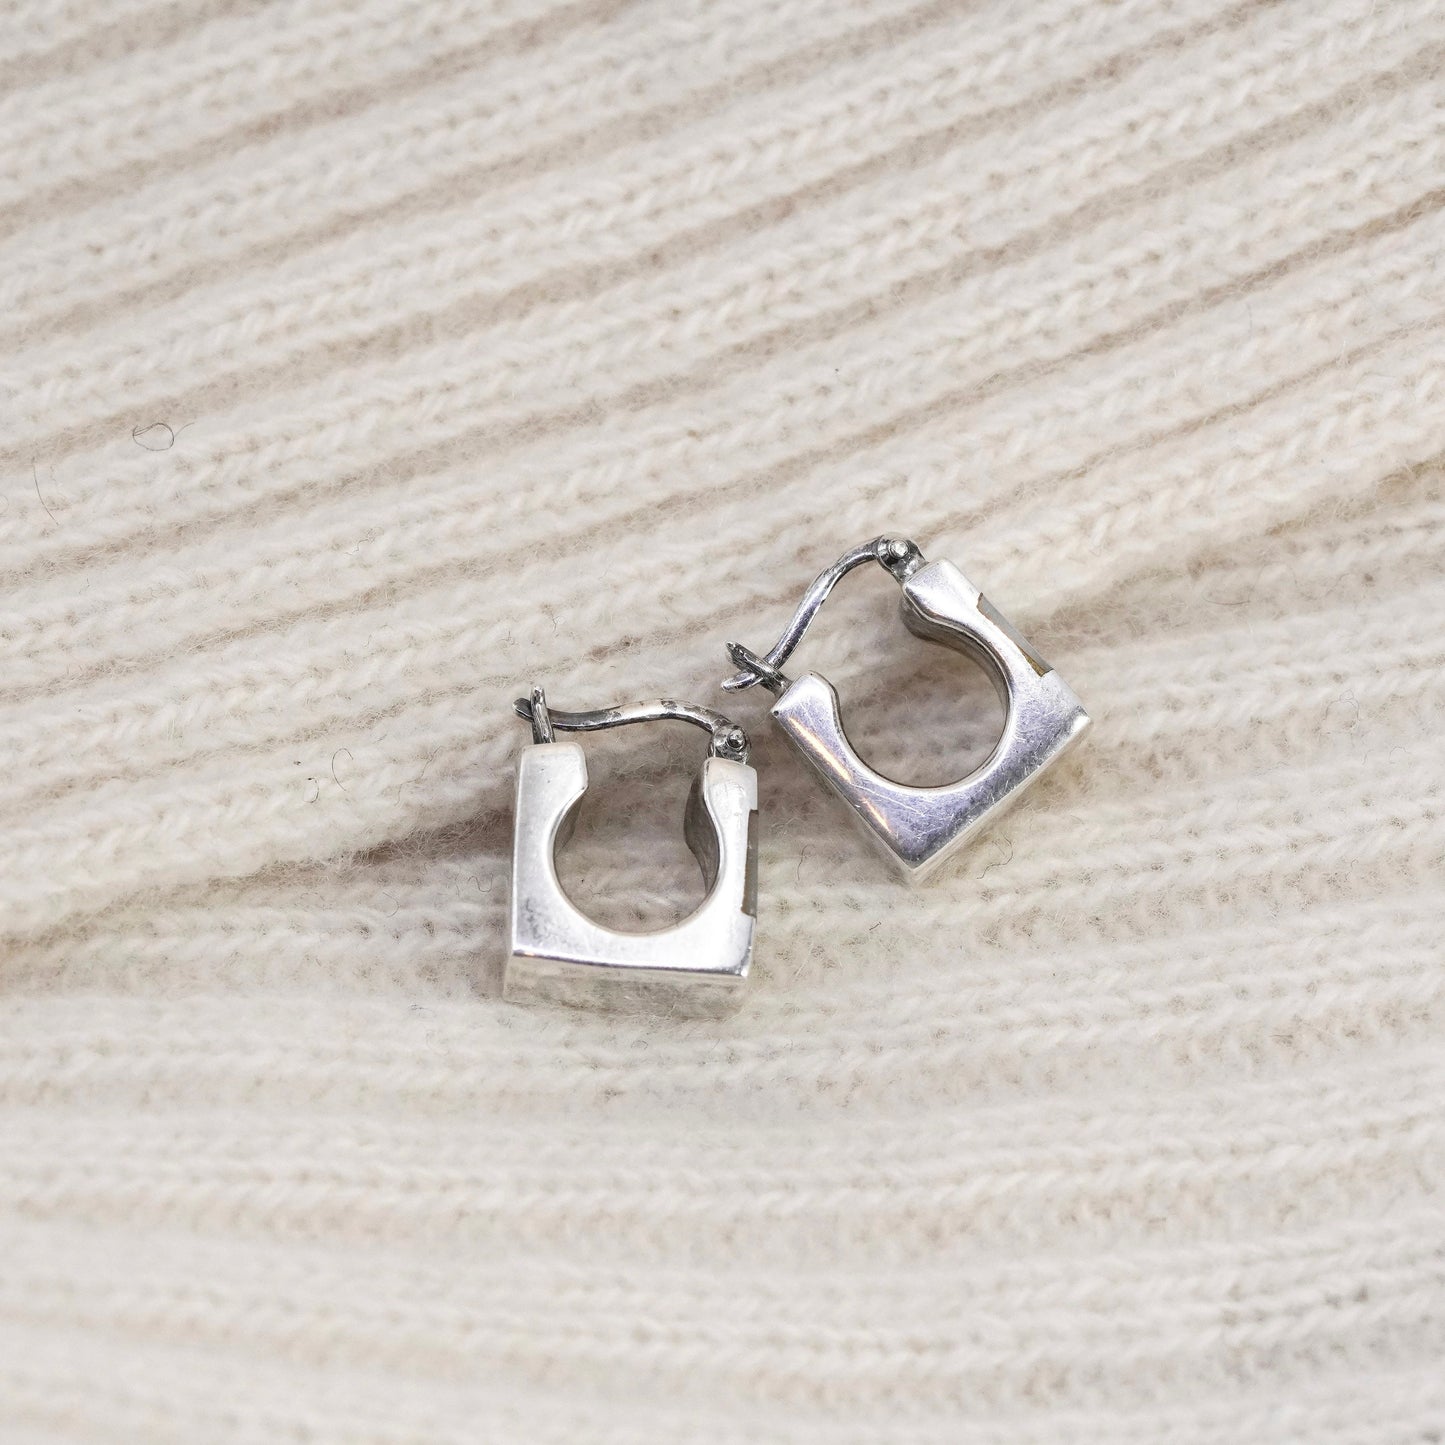 0.5”, sterling silver earrings, square 925 hoops, Huggie with mother of pearl